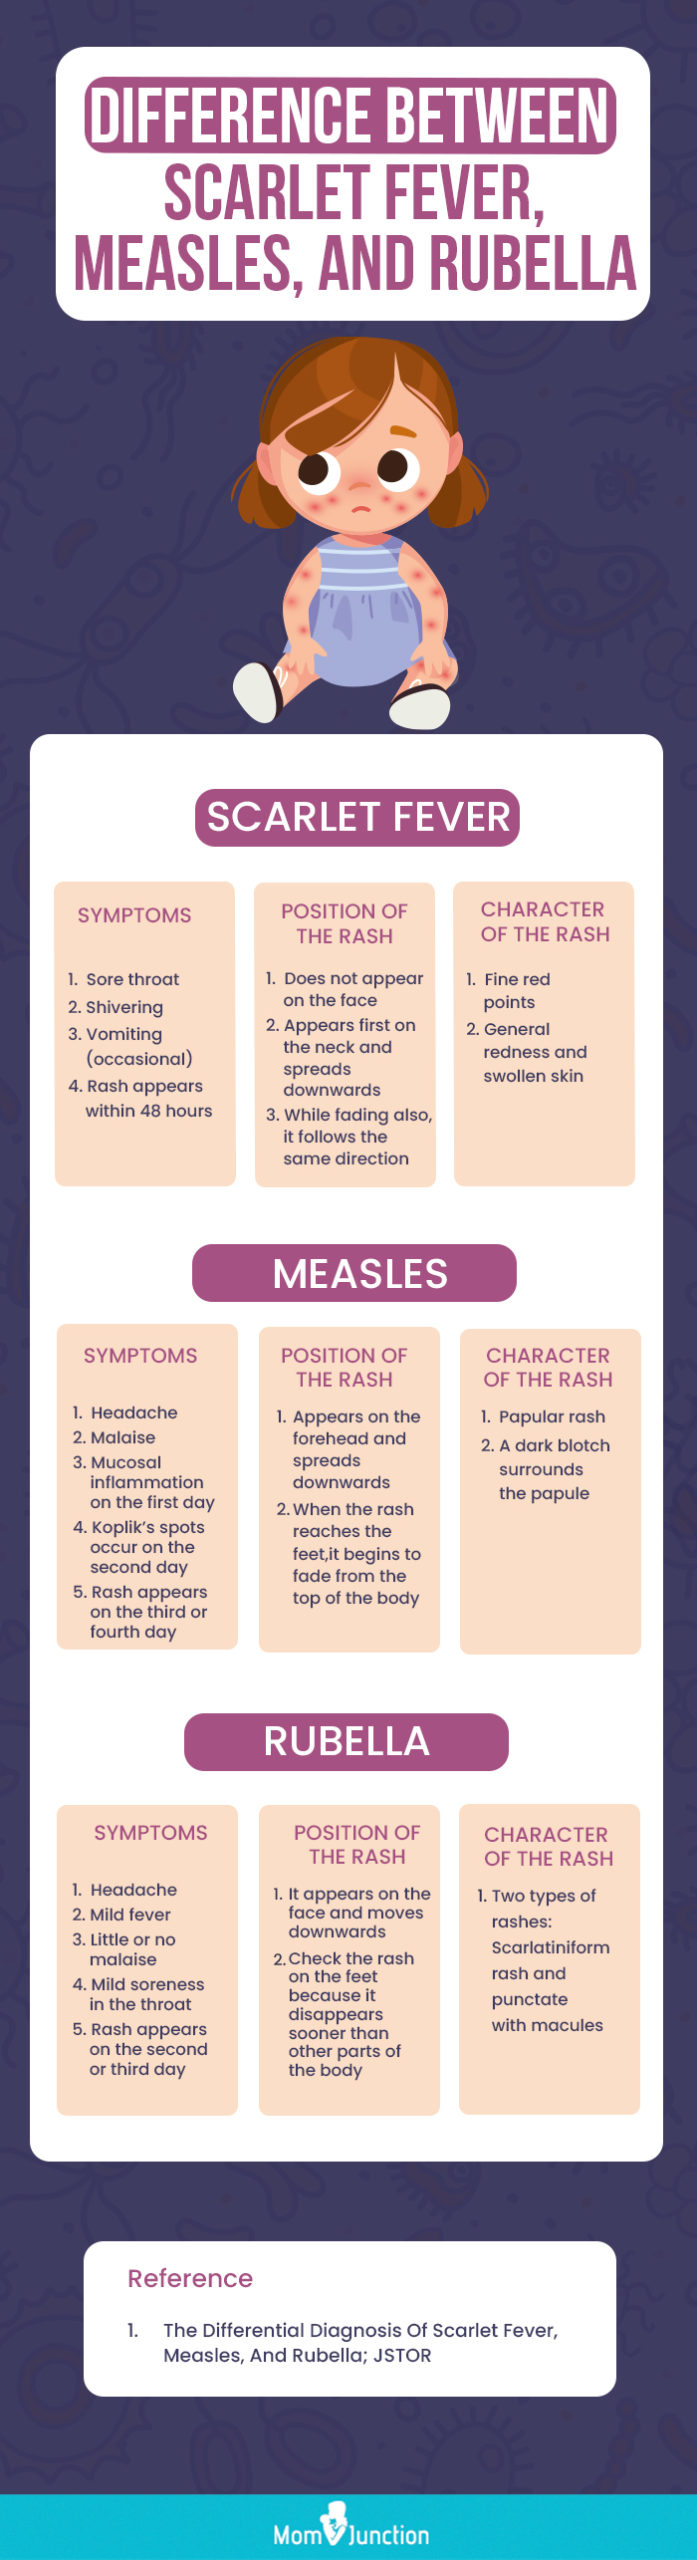 difference between scarlet fever measles and rubella [infographic]